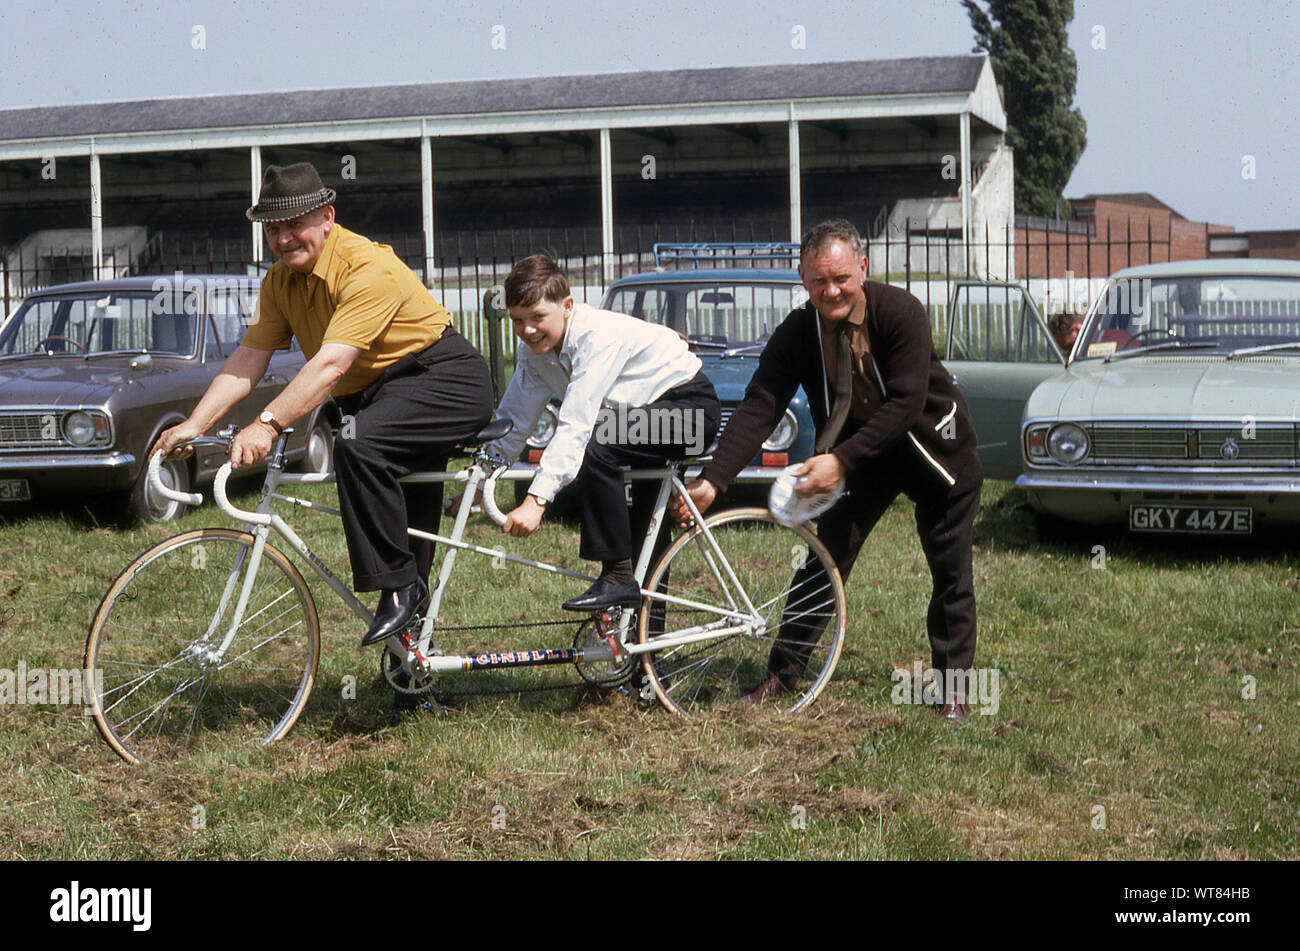 1960s, historical, Outside at the annual CTC rally at York racecourse, a man and a boy sitting on a 'Cincelli' tandem bicycle. Cars of the era, including Ford Cortinas are parked in the field. Stock Photo